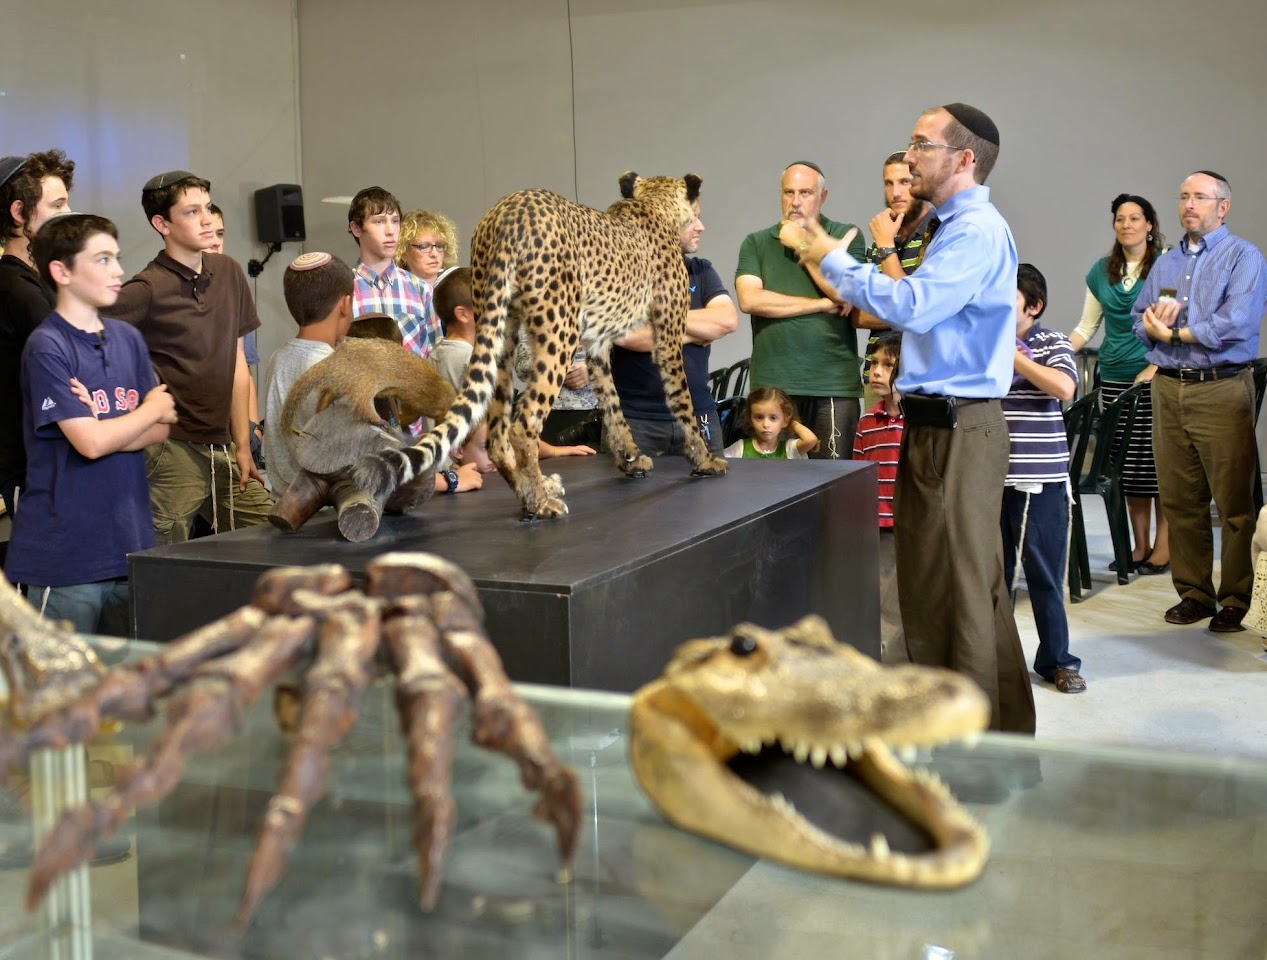 The Biblical Museum of Natural History